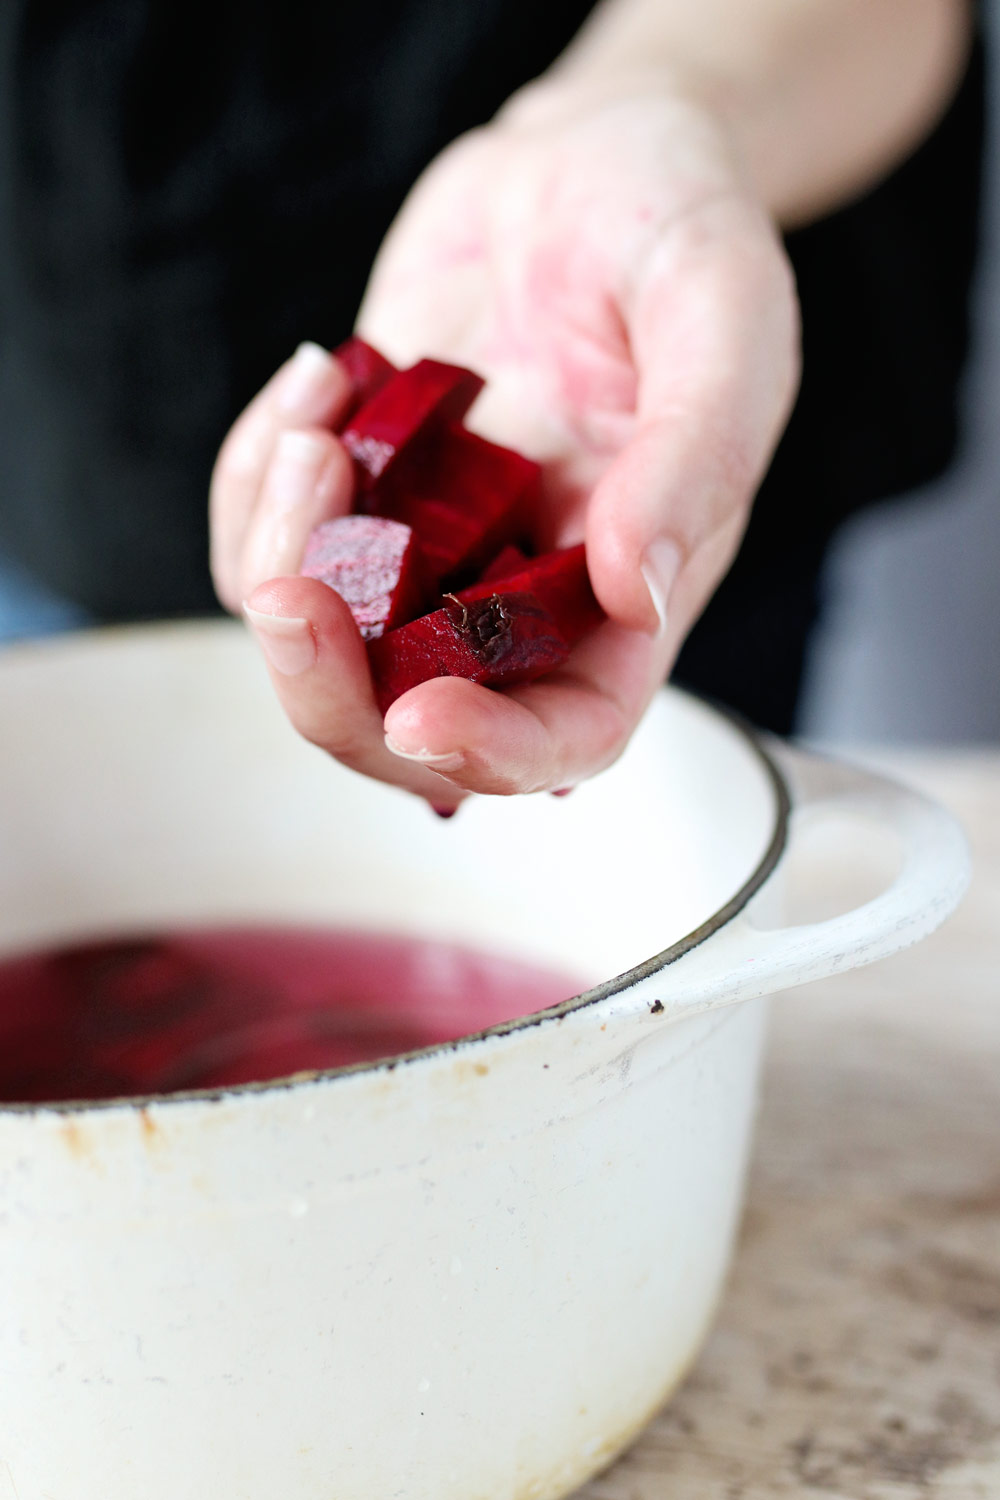 How To Make Natural Dye with Beets